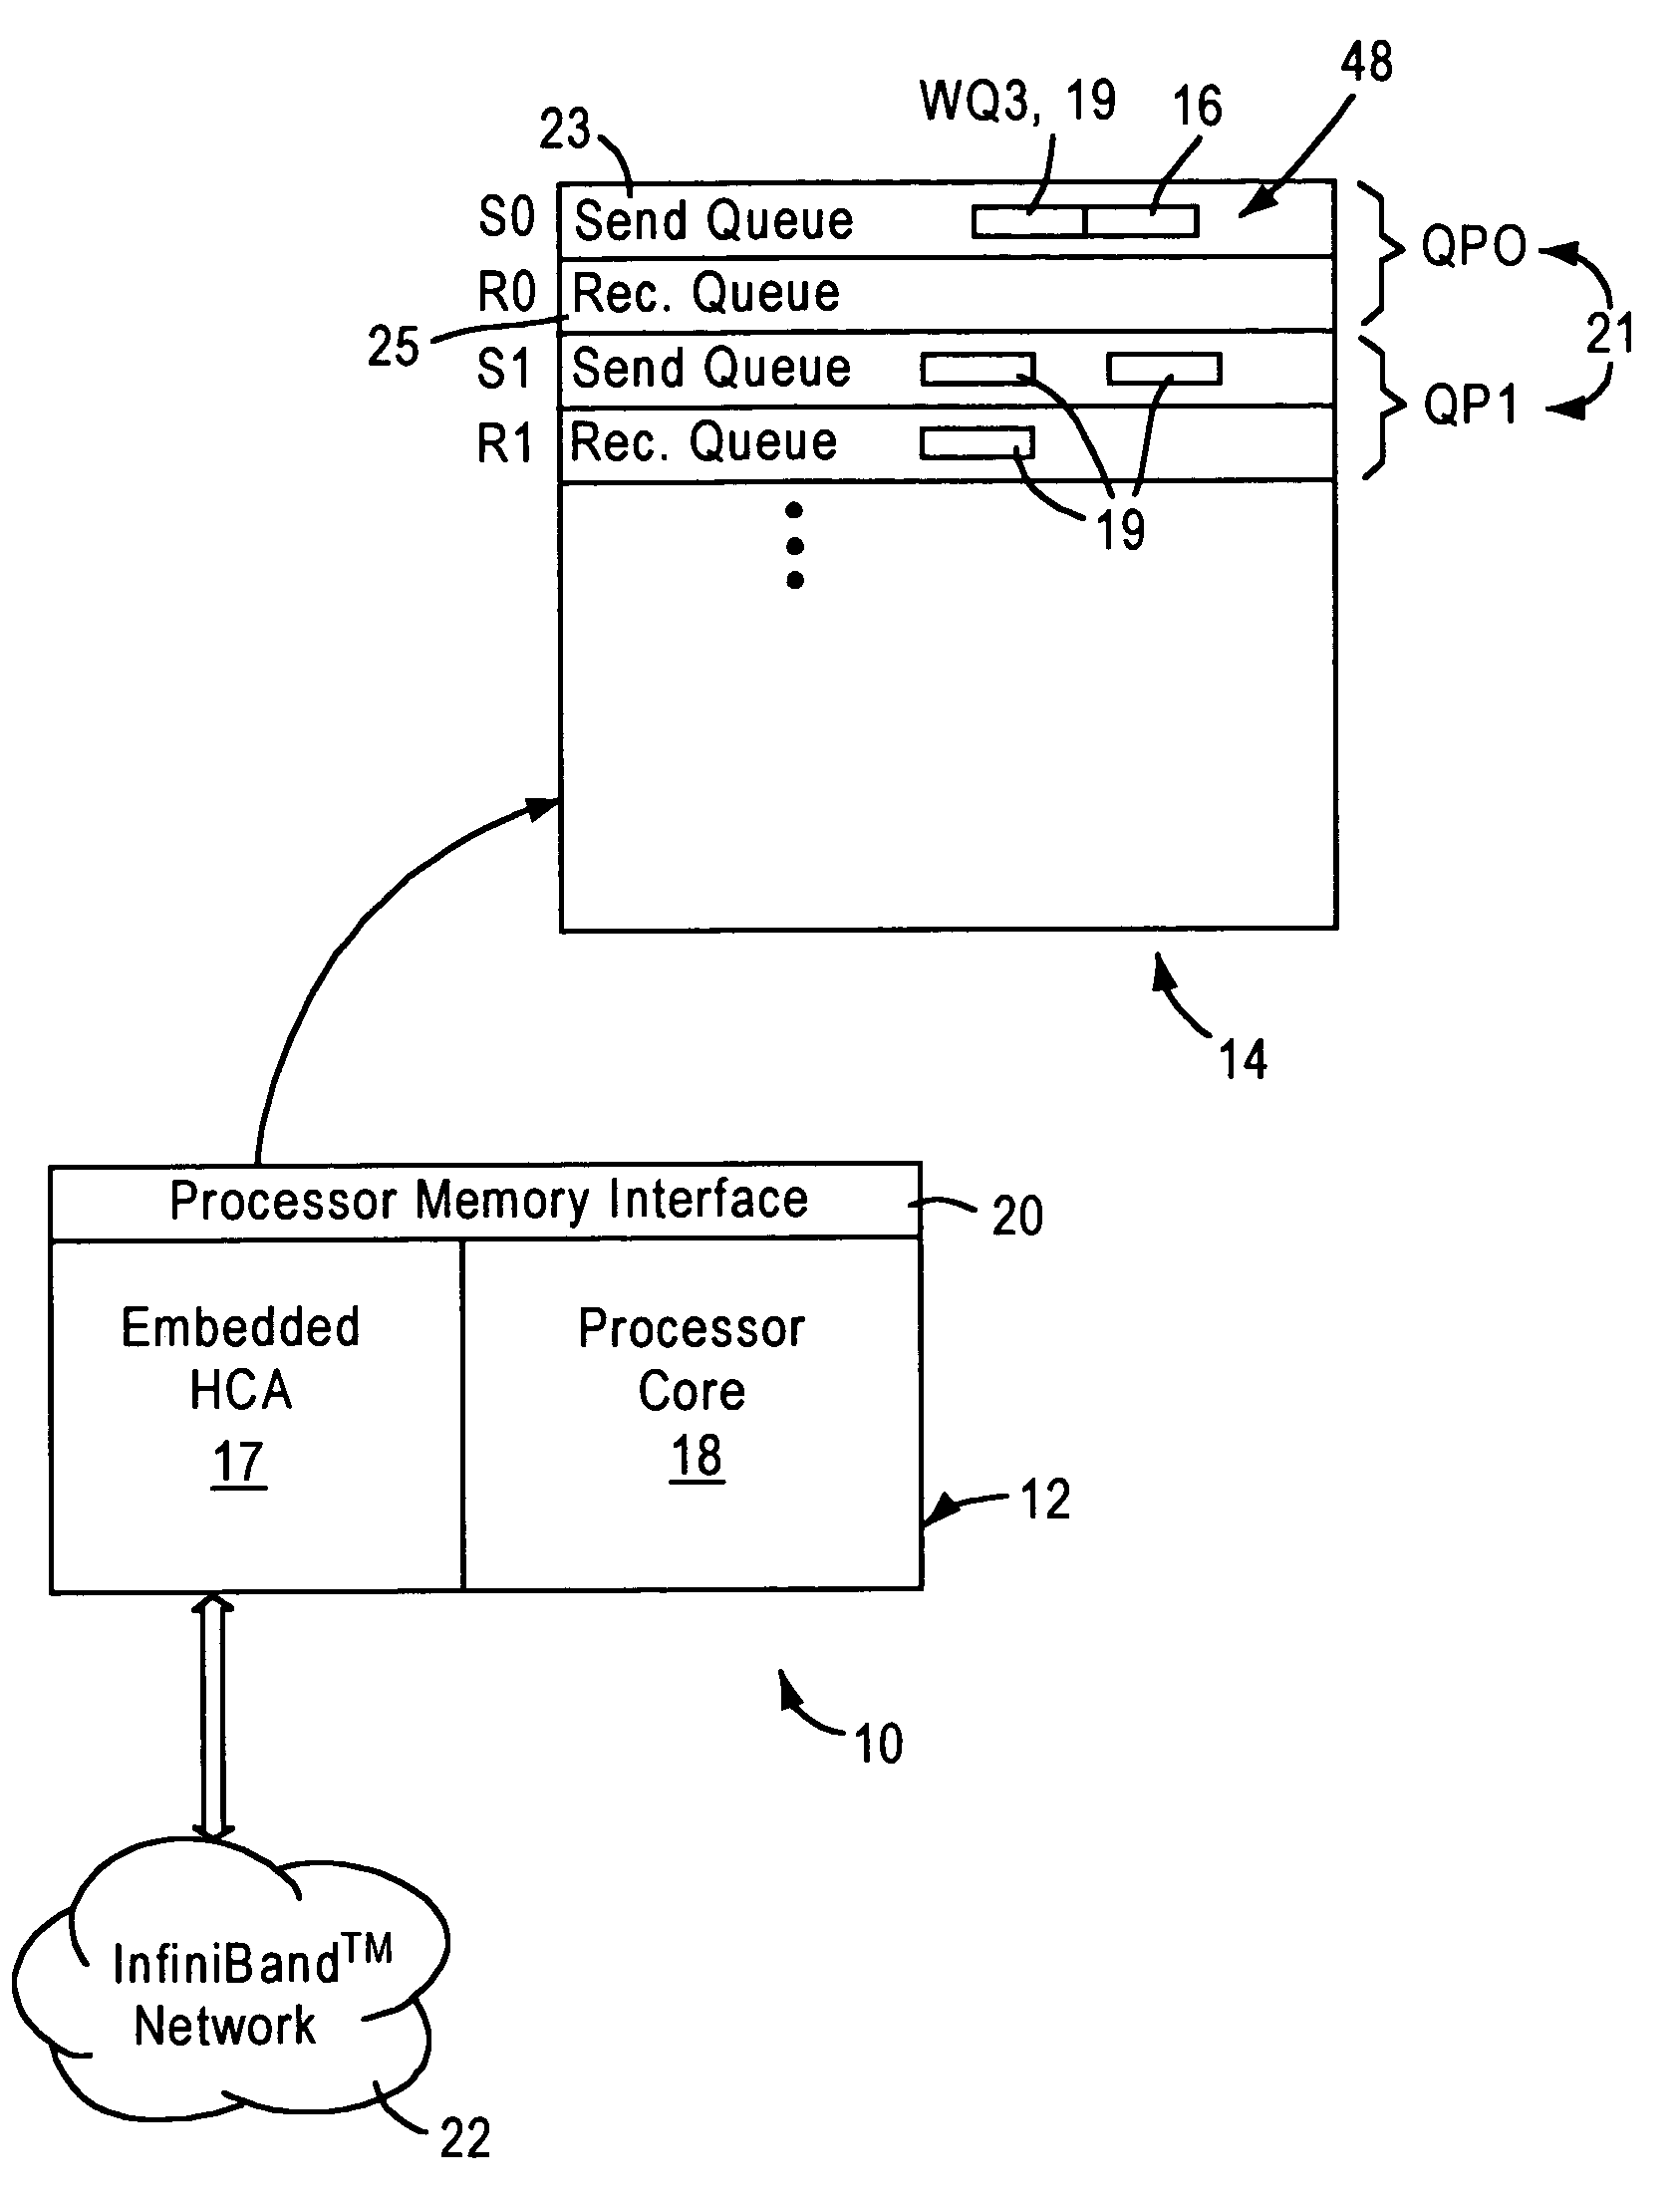 Embedded channel adapter having transport layer configured for prioritizing selection of work descriptors based on respective virtual lane priorities